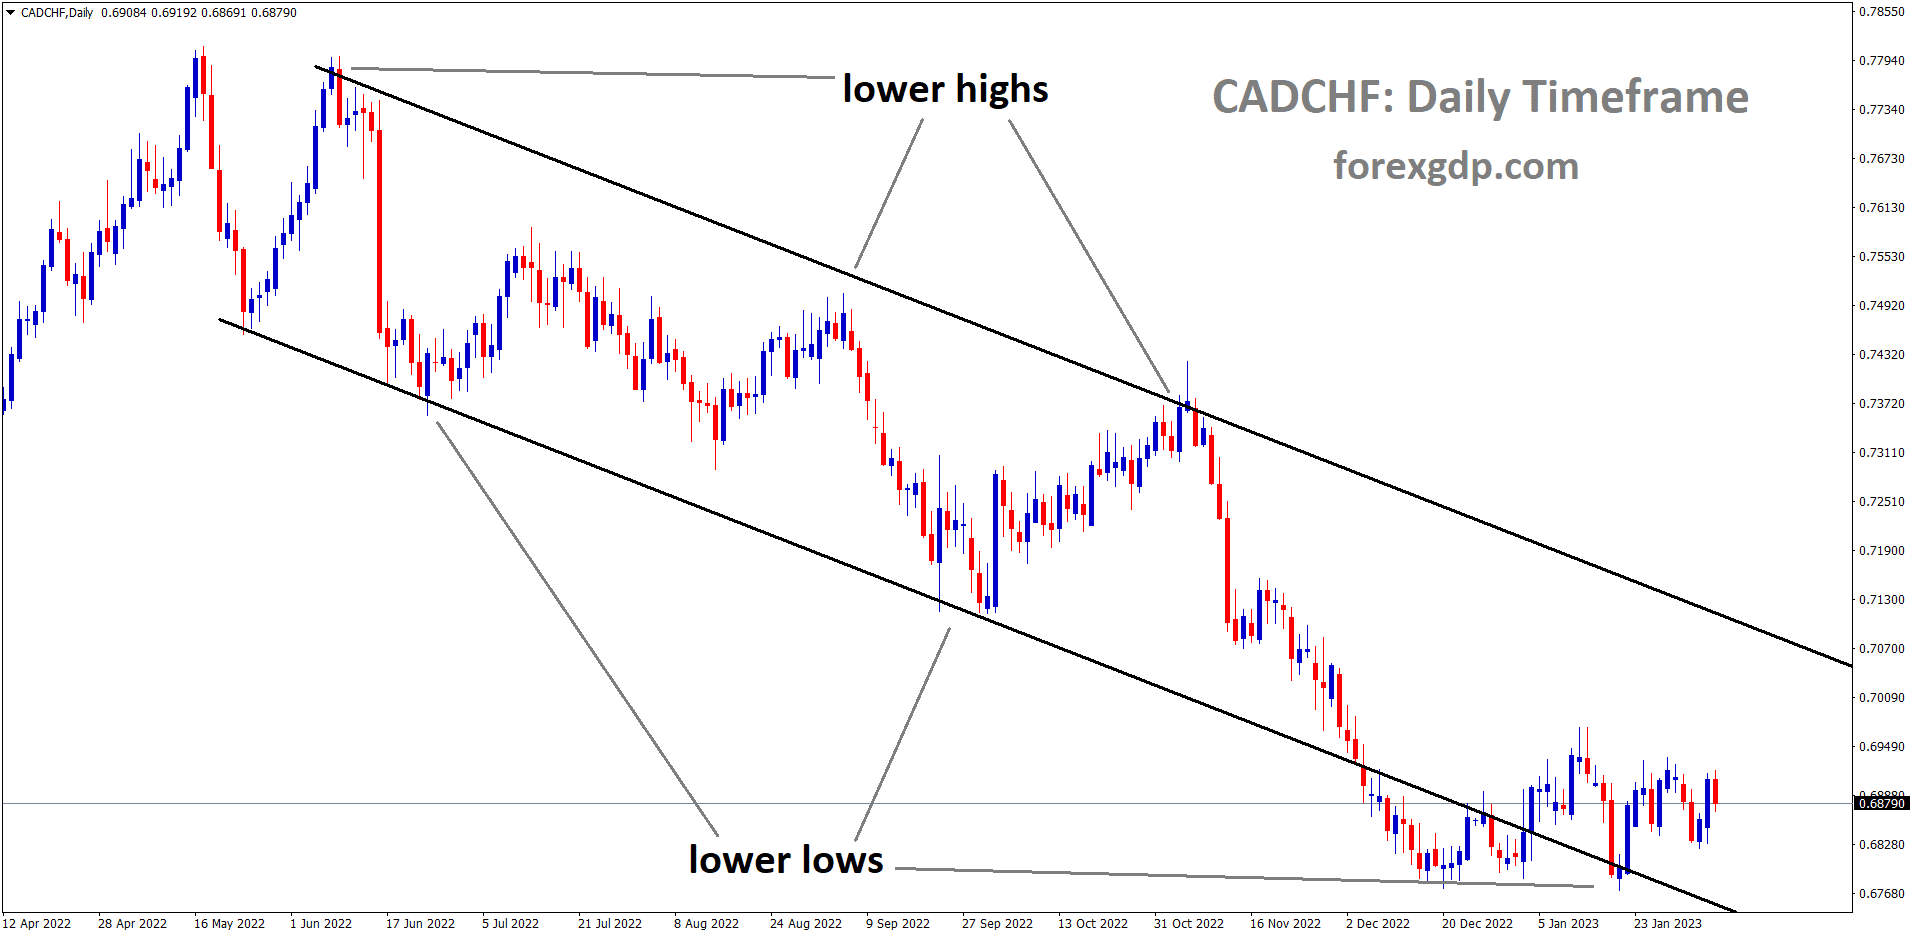 CADCHF is moving in a Descending channel and the market has rebounded from the lower low area of the channel